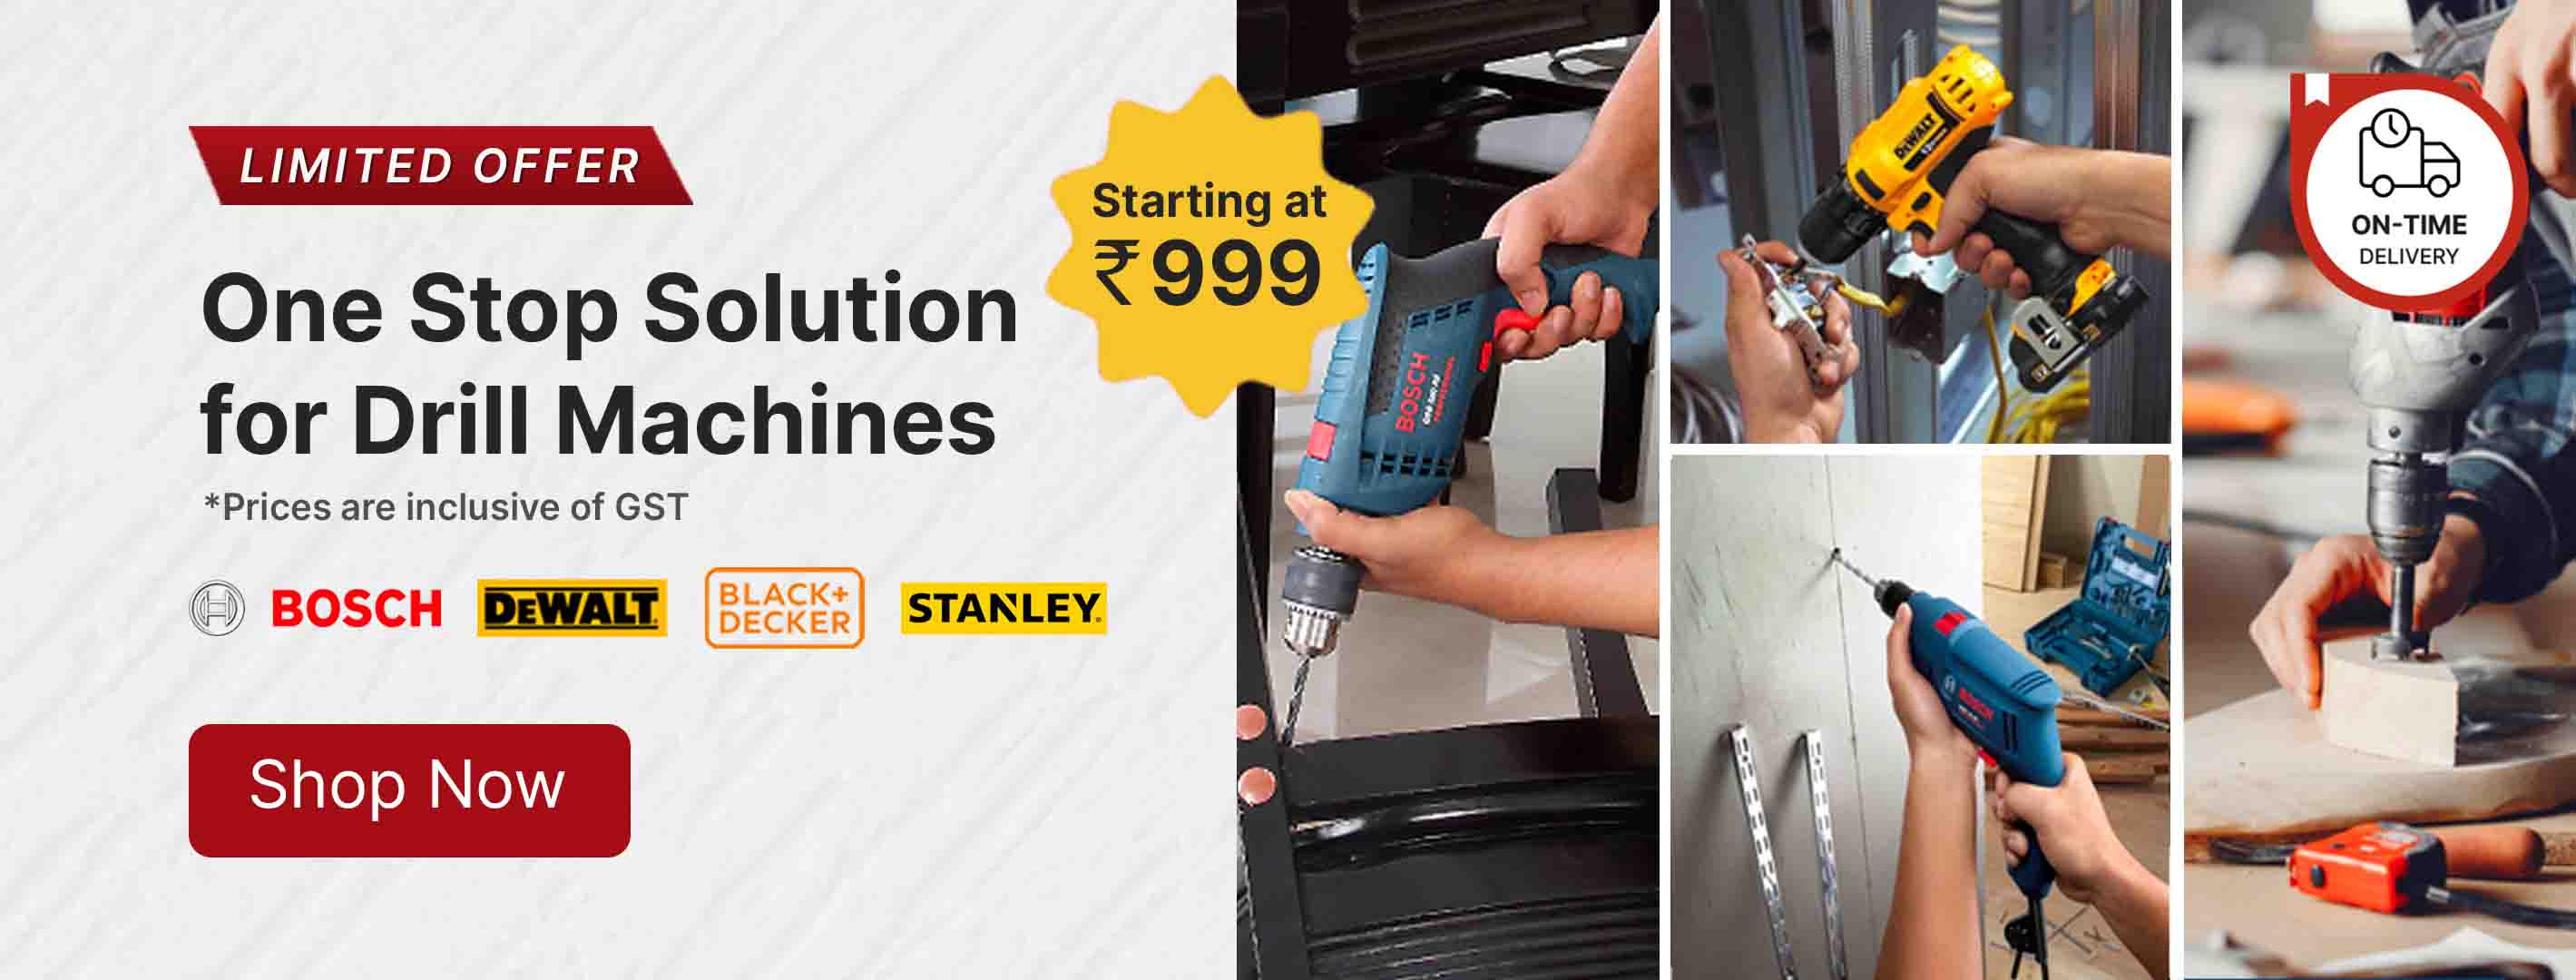 One Stop Solution for Drill Machine